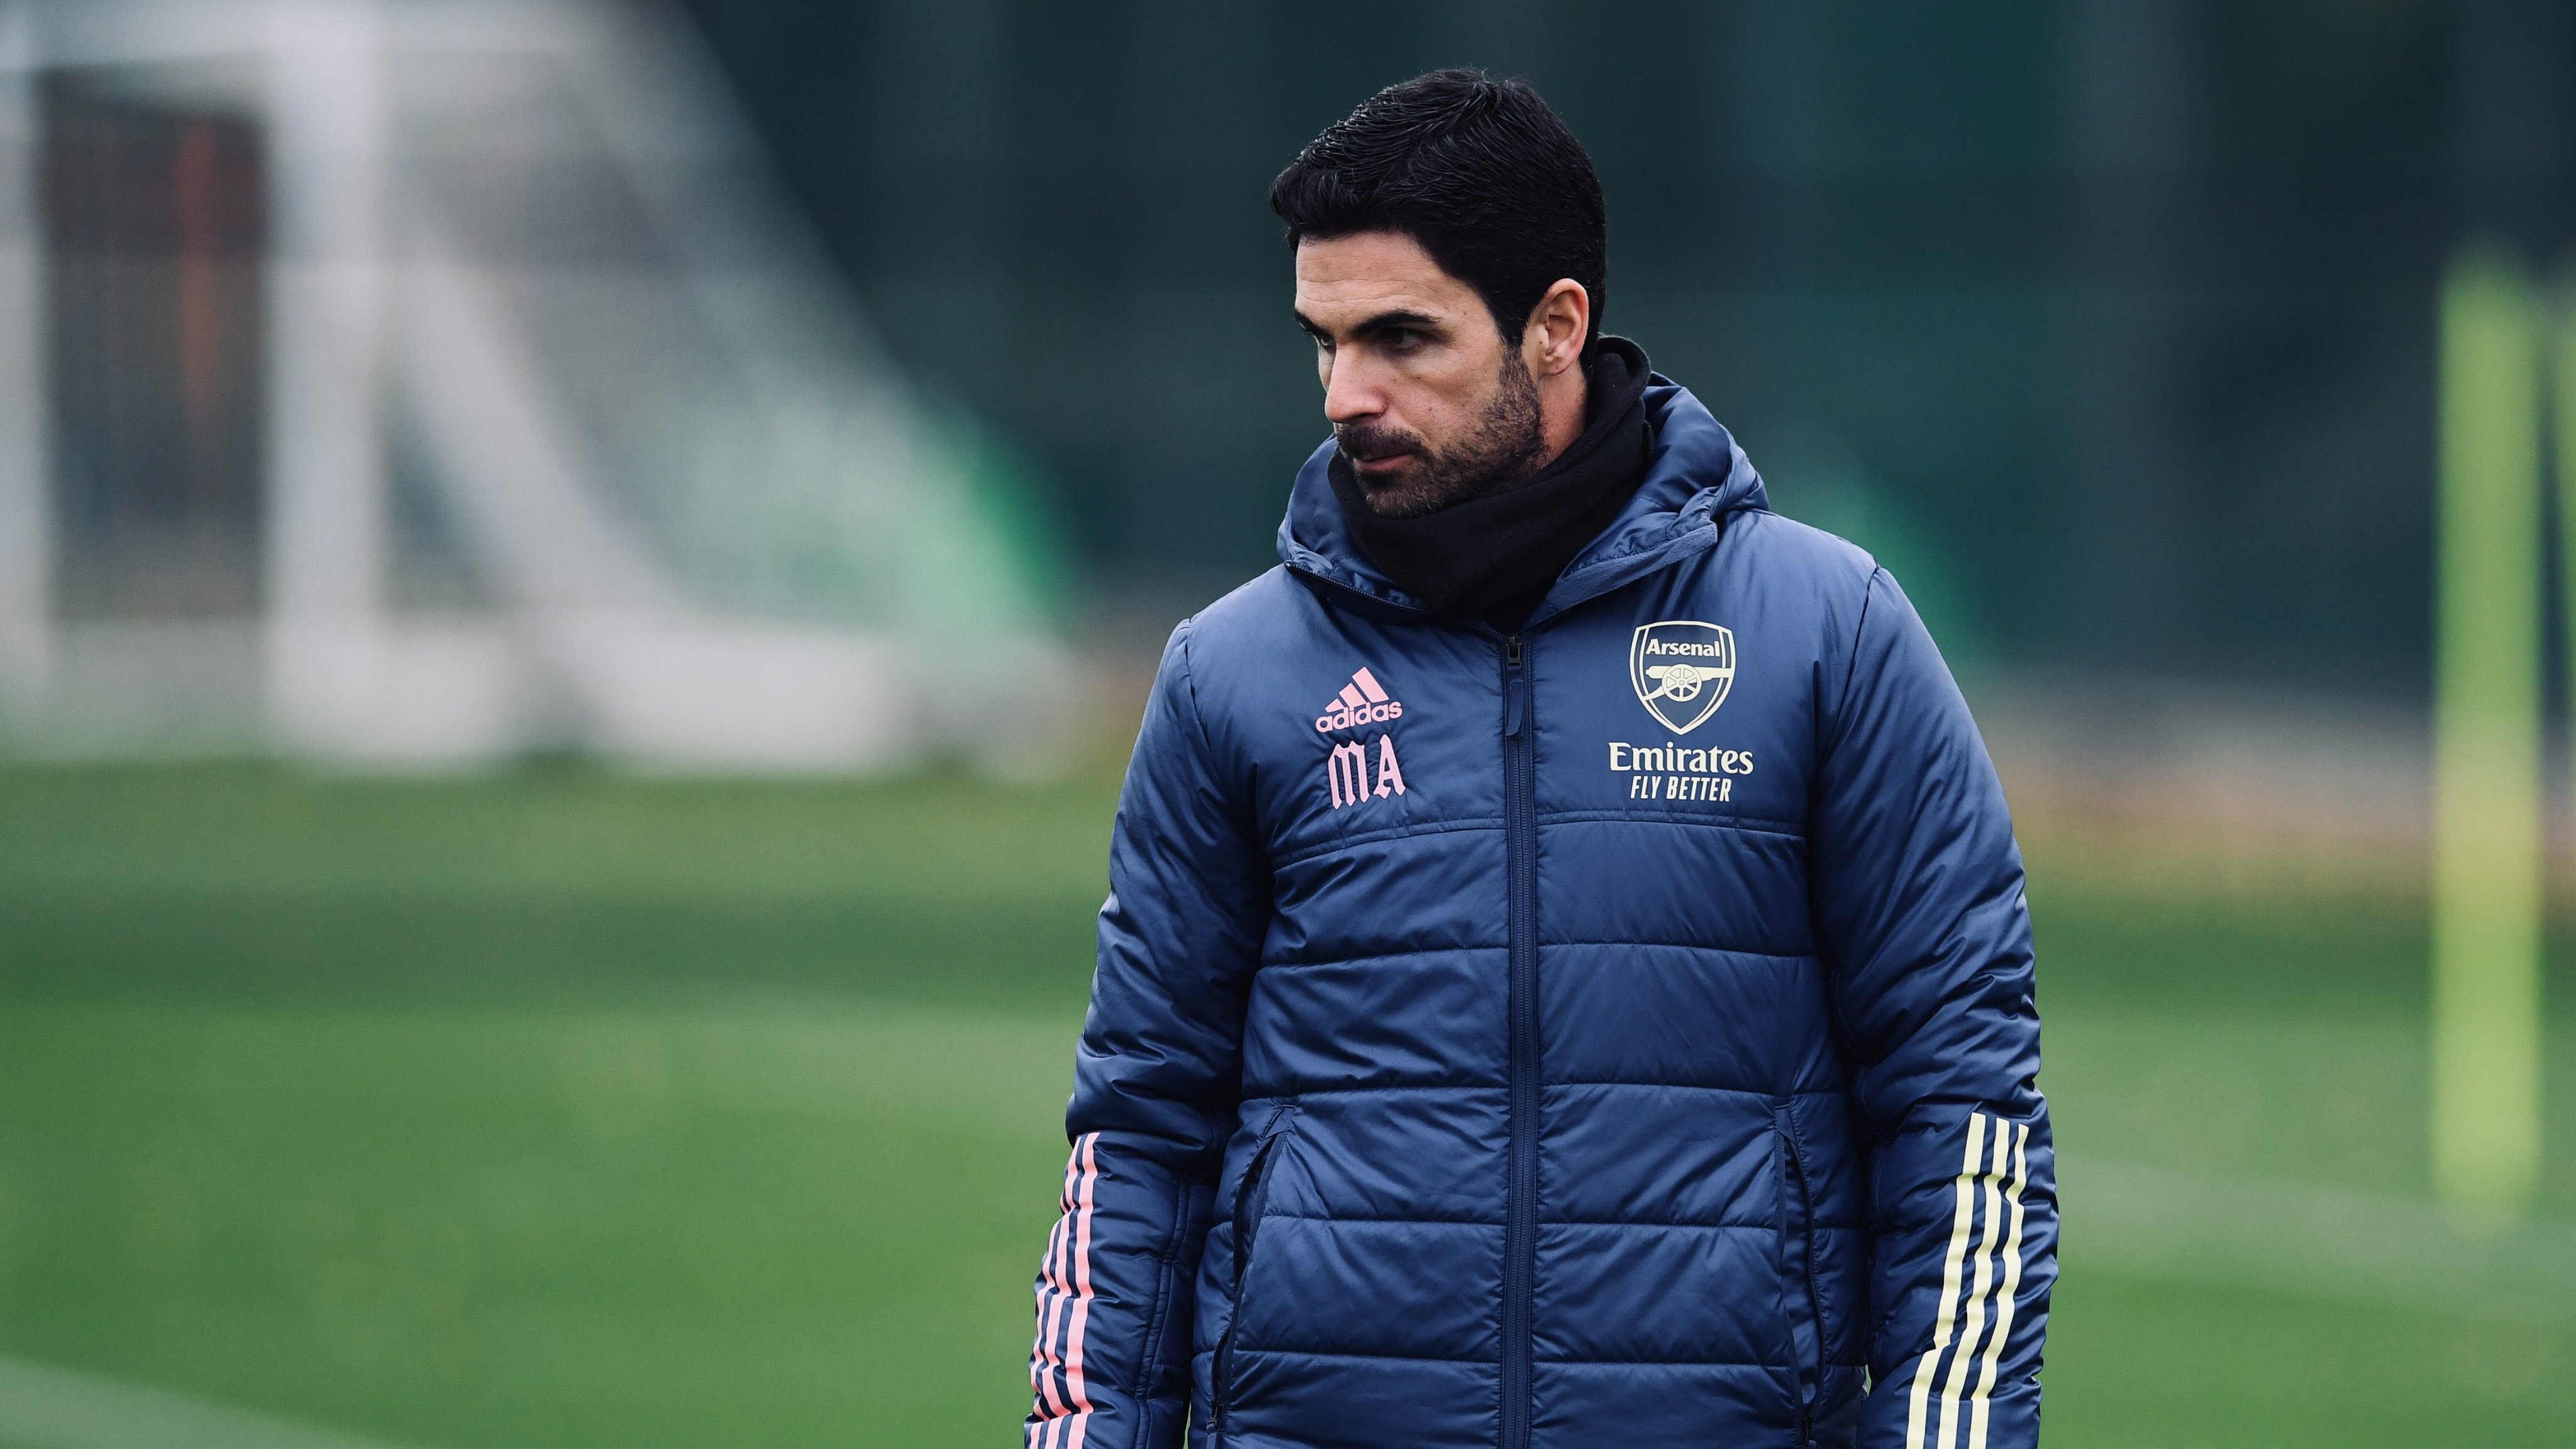 Would like more clarity on why we are postponing matches, admits Mikel Arteta